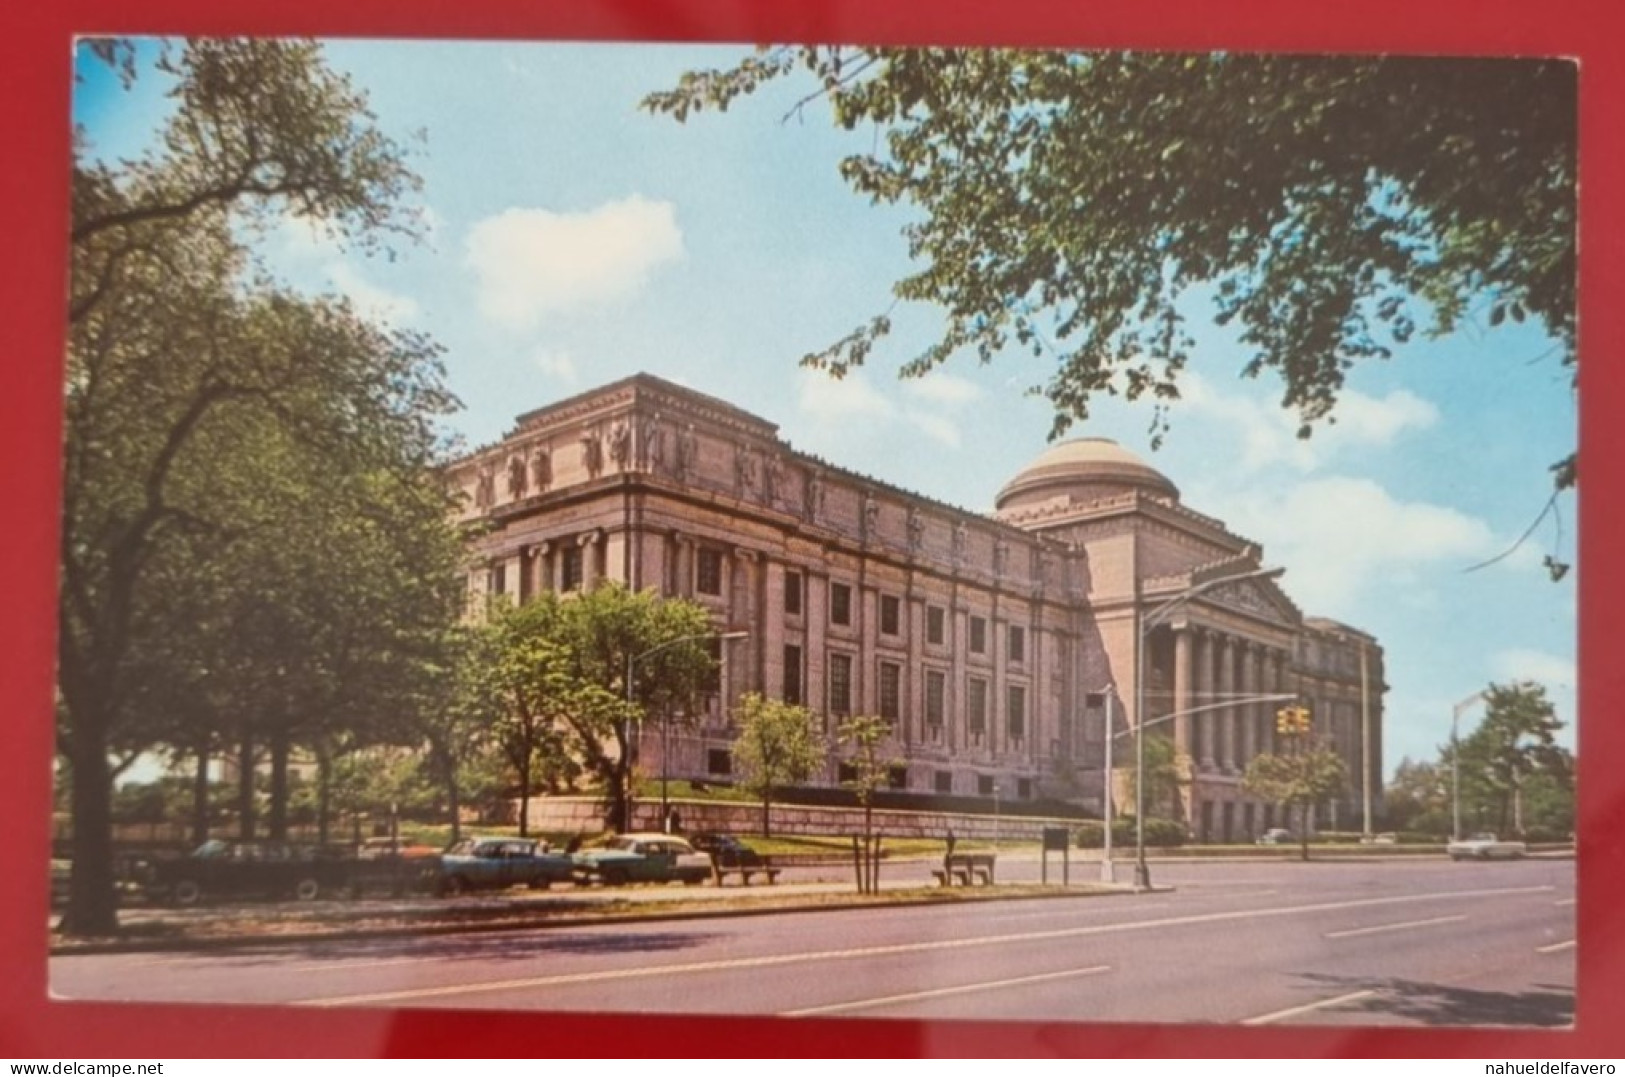 Uncirculated Postcard - USA - NY, NEW YORK CITY - BROOKLYN MUSEUM - Musées